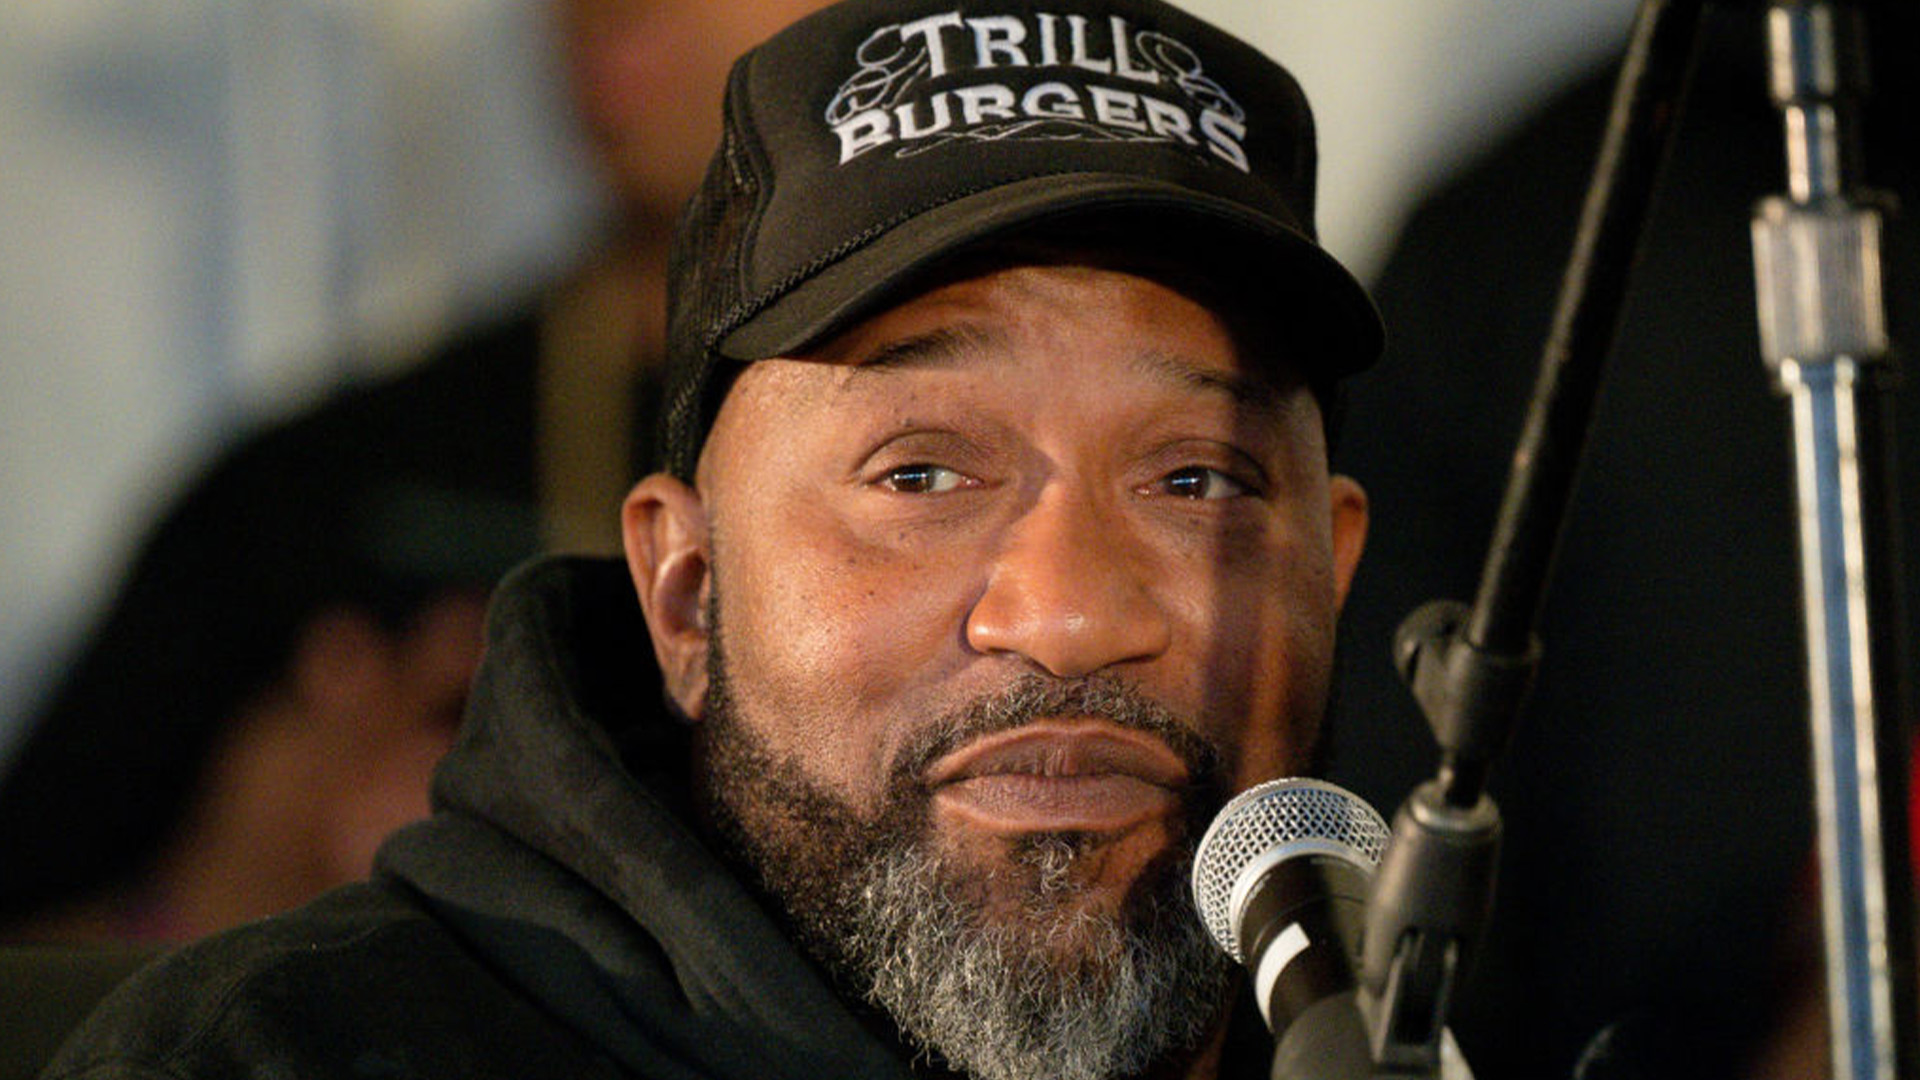 Bun B Sues Trill Burgers' Former Employees For Alleged Fraud, Misusing $45K Of The Restaurant's Funds